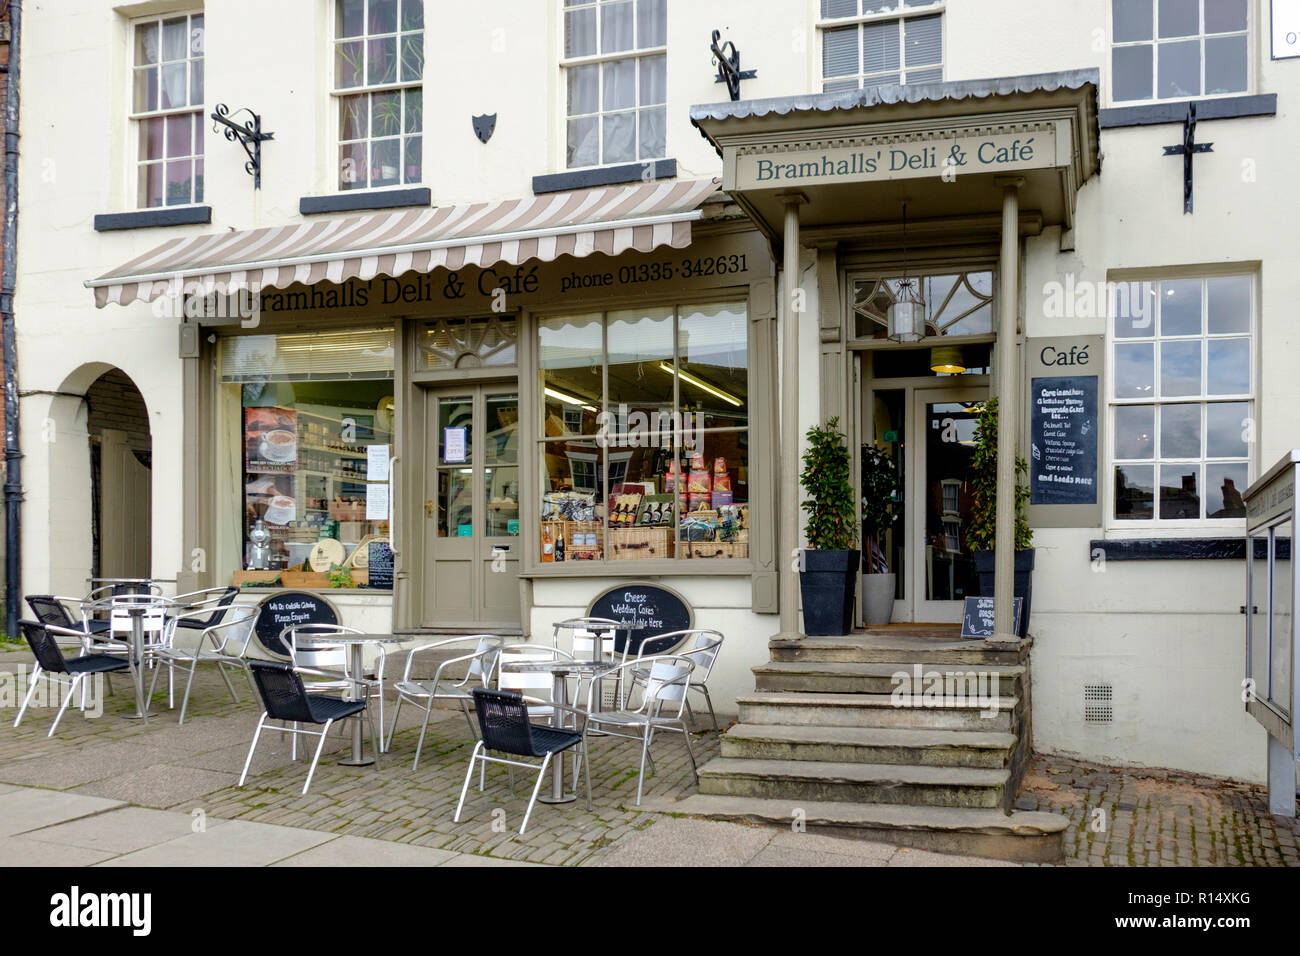 Ashbourne, a small town in the Derbyshire Dales, England UK. Bramhalls deli and cafe Stock Photo